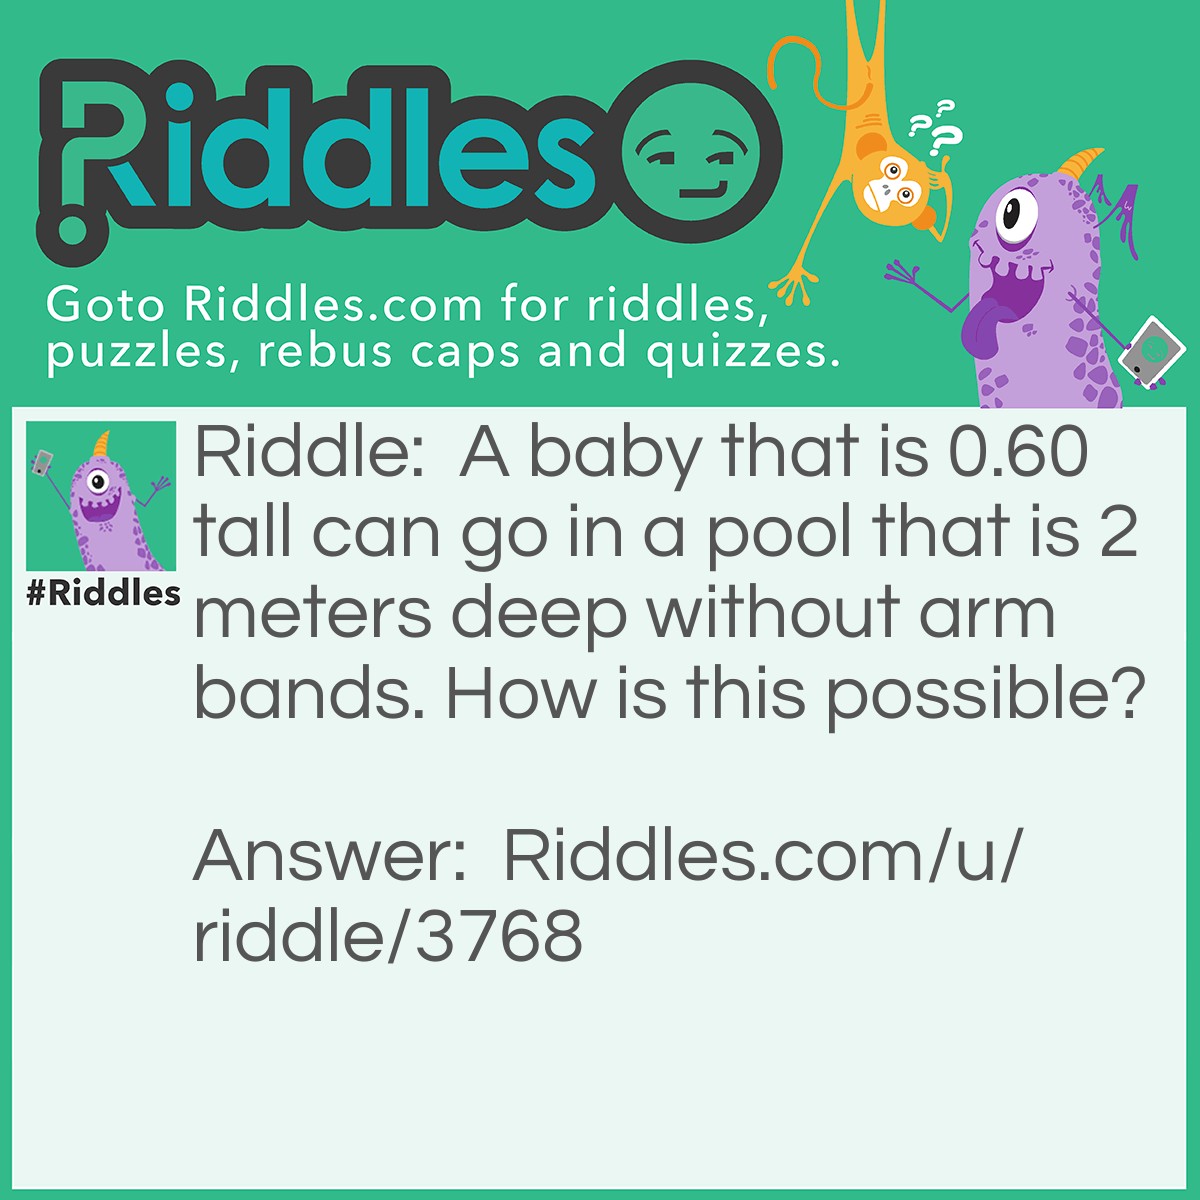 Riddle: A baby that is 0.60 tall can go in a pool that is 2 meters deep without arm bands. How is this possible? Answer: The Baby is being held by its parents.